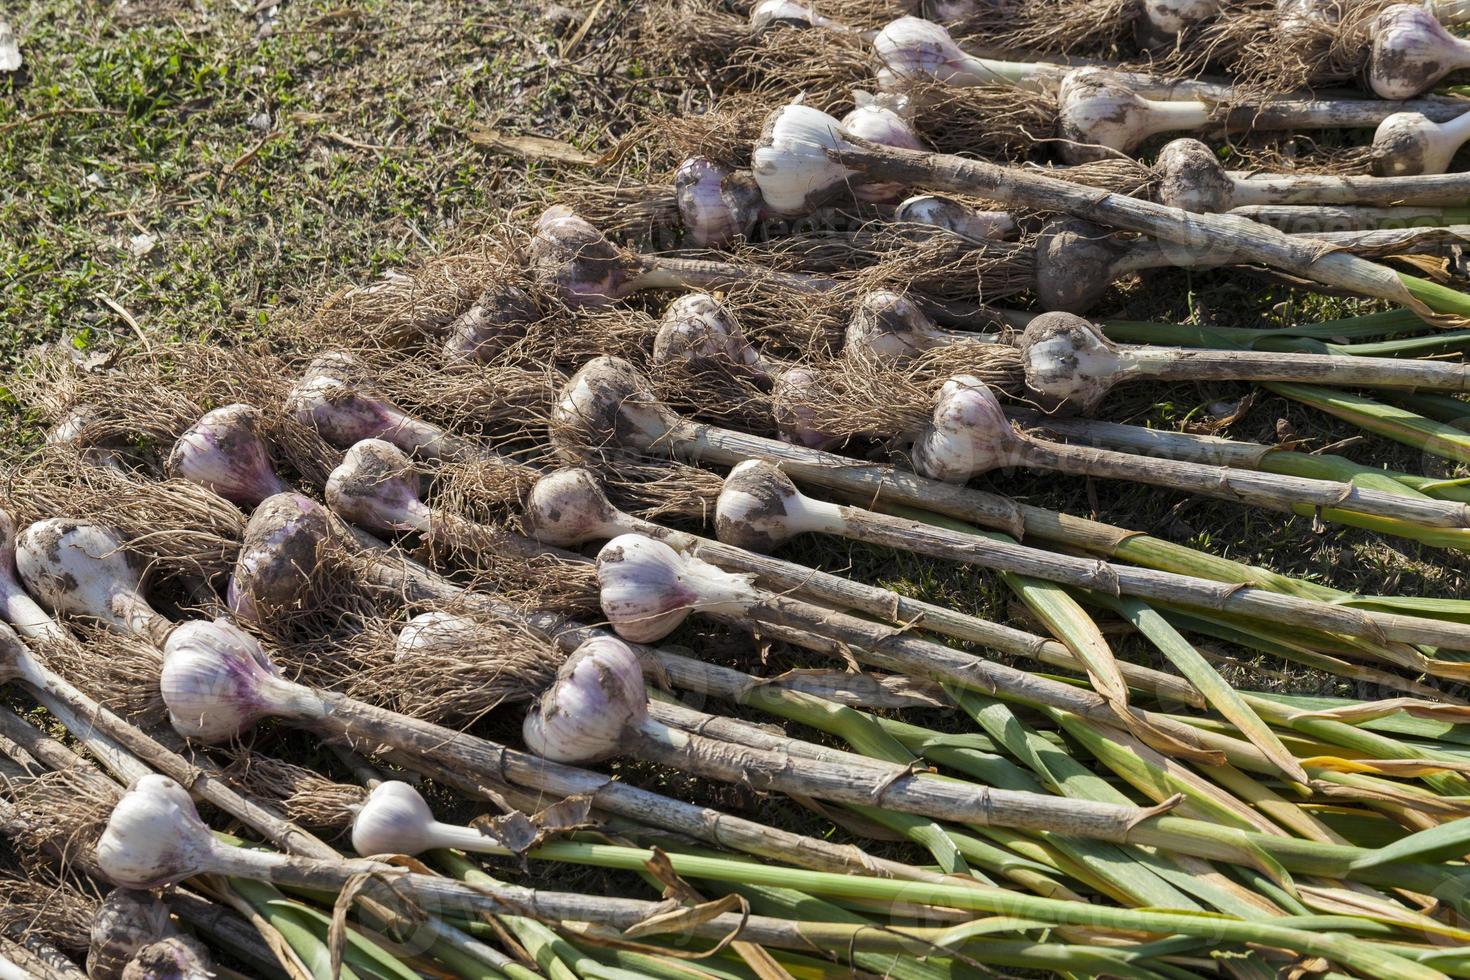 the harvested garlic crop in agriculture photo